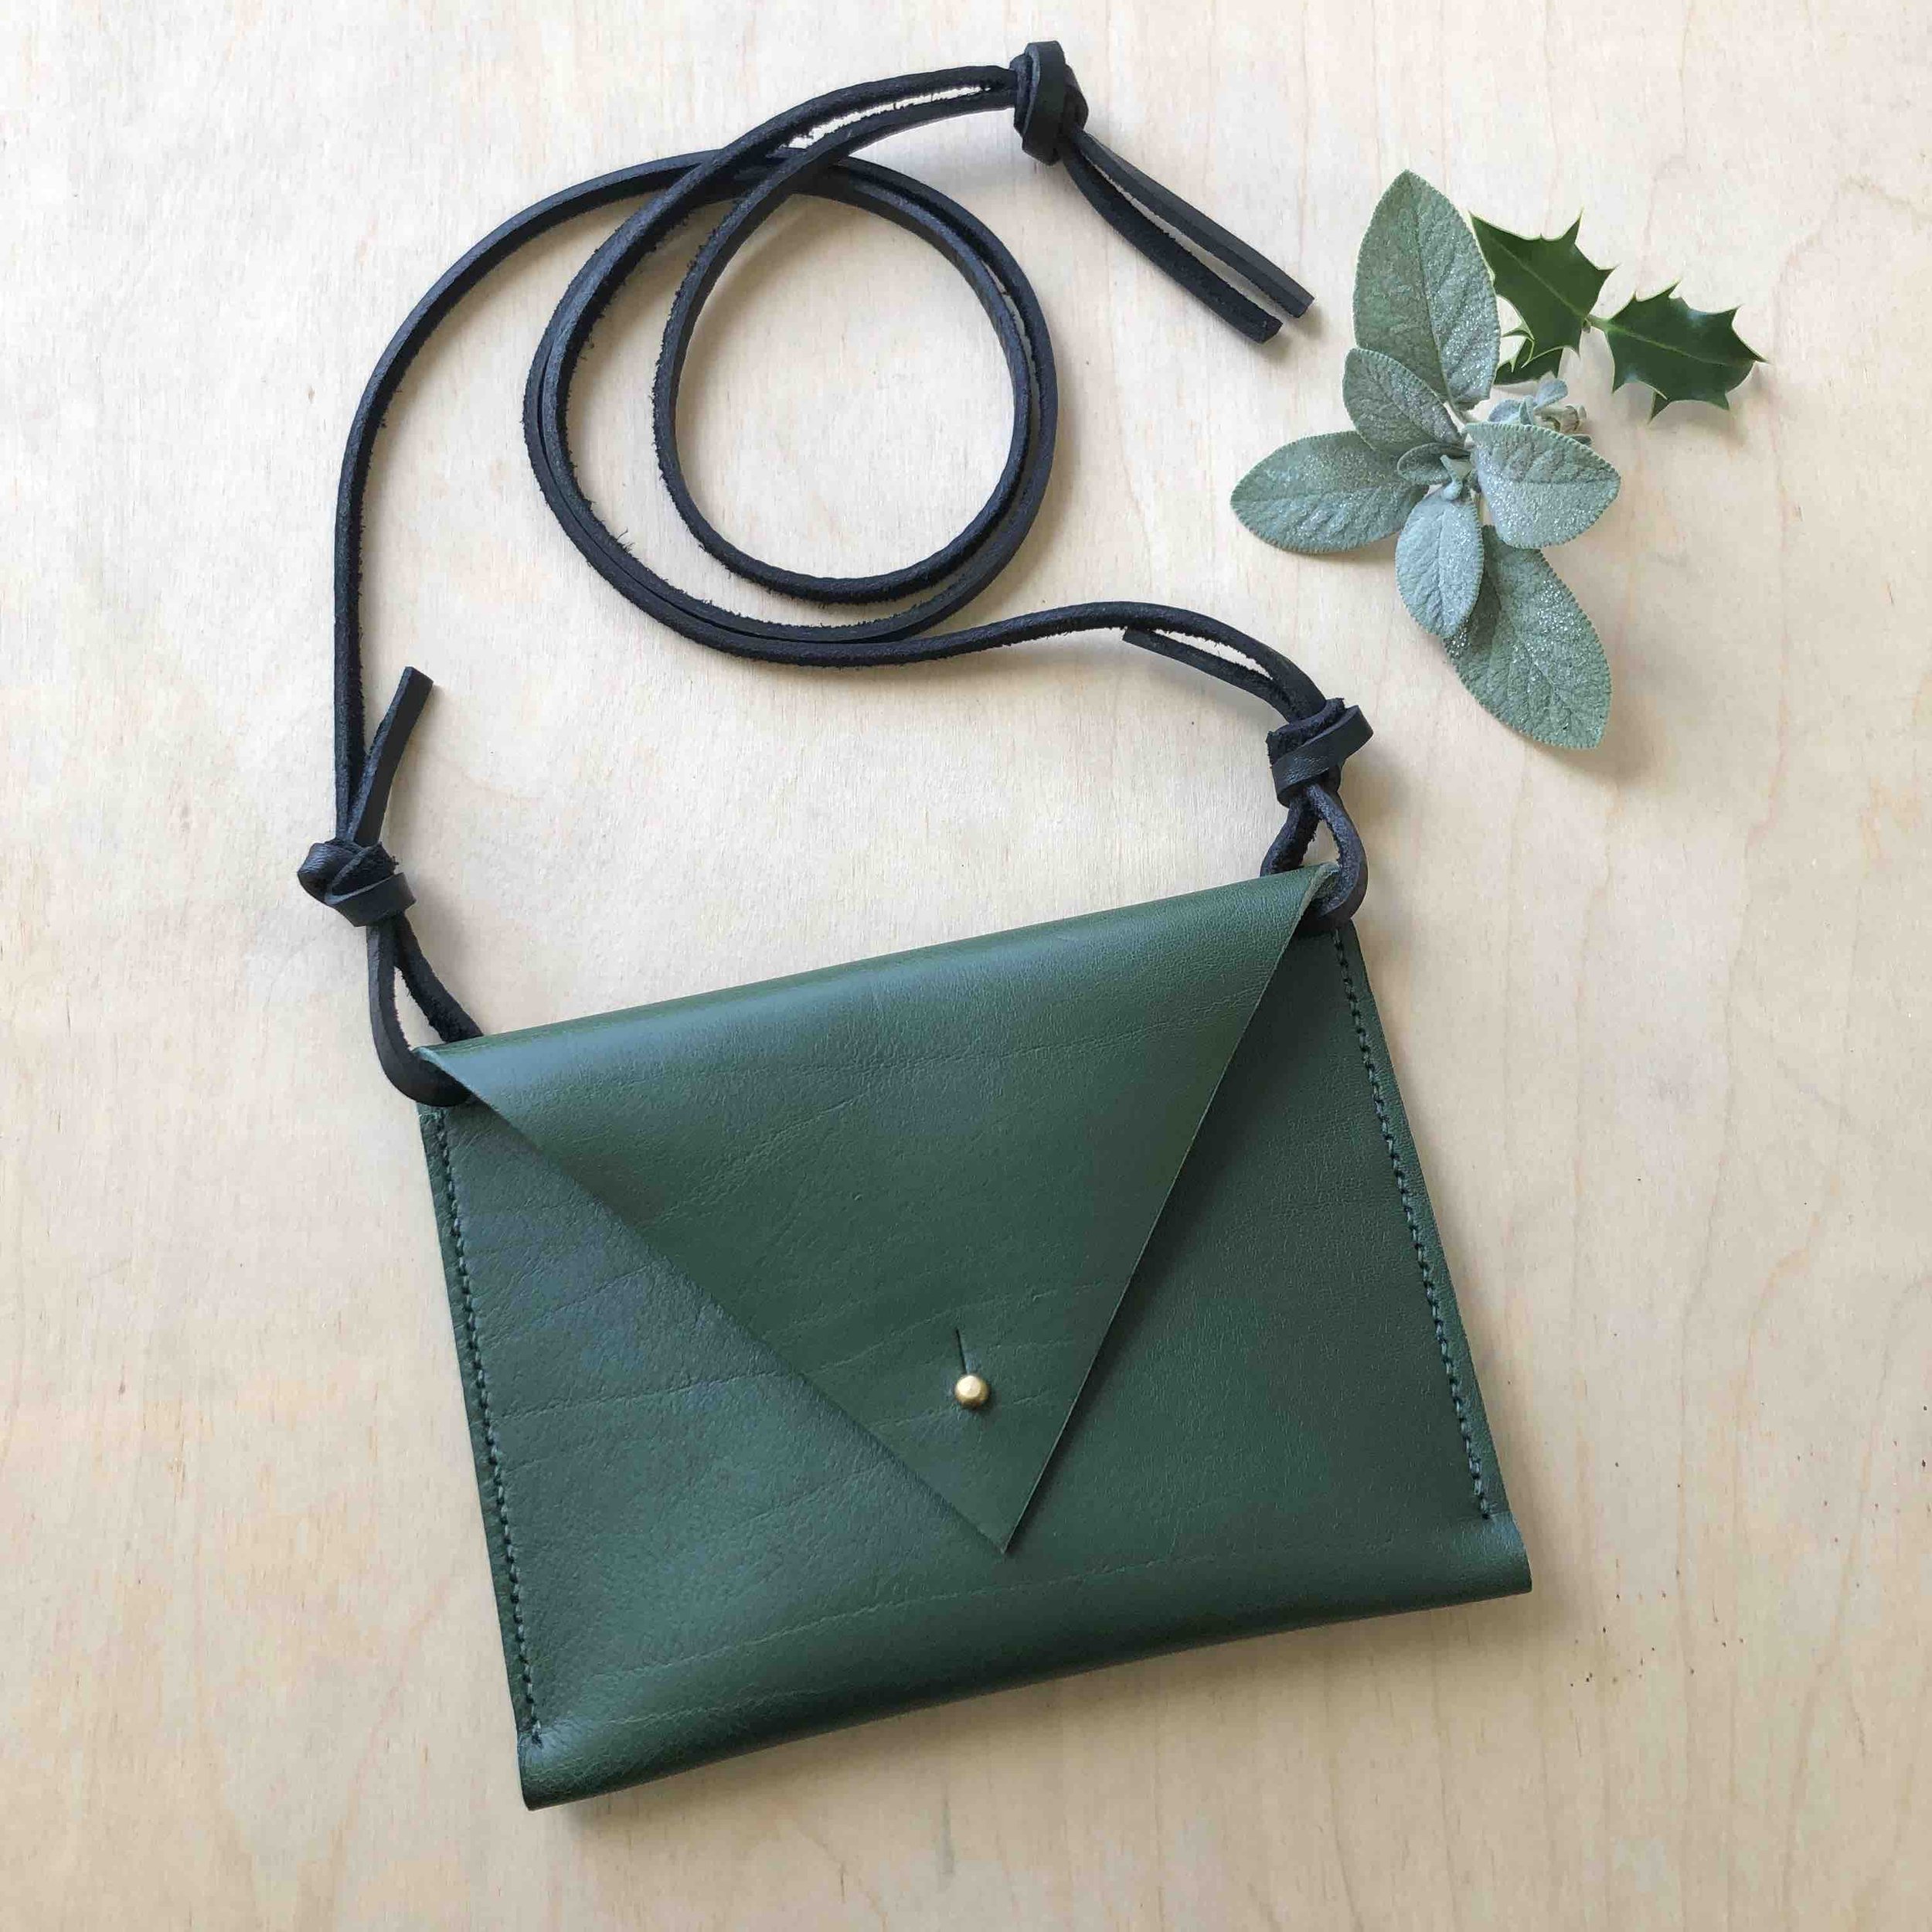 CARV sustainable leather bag handmade in the UK.